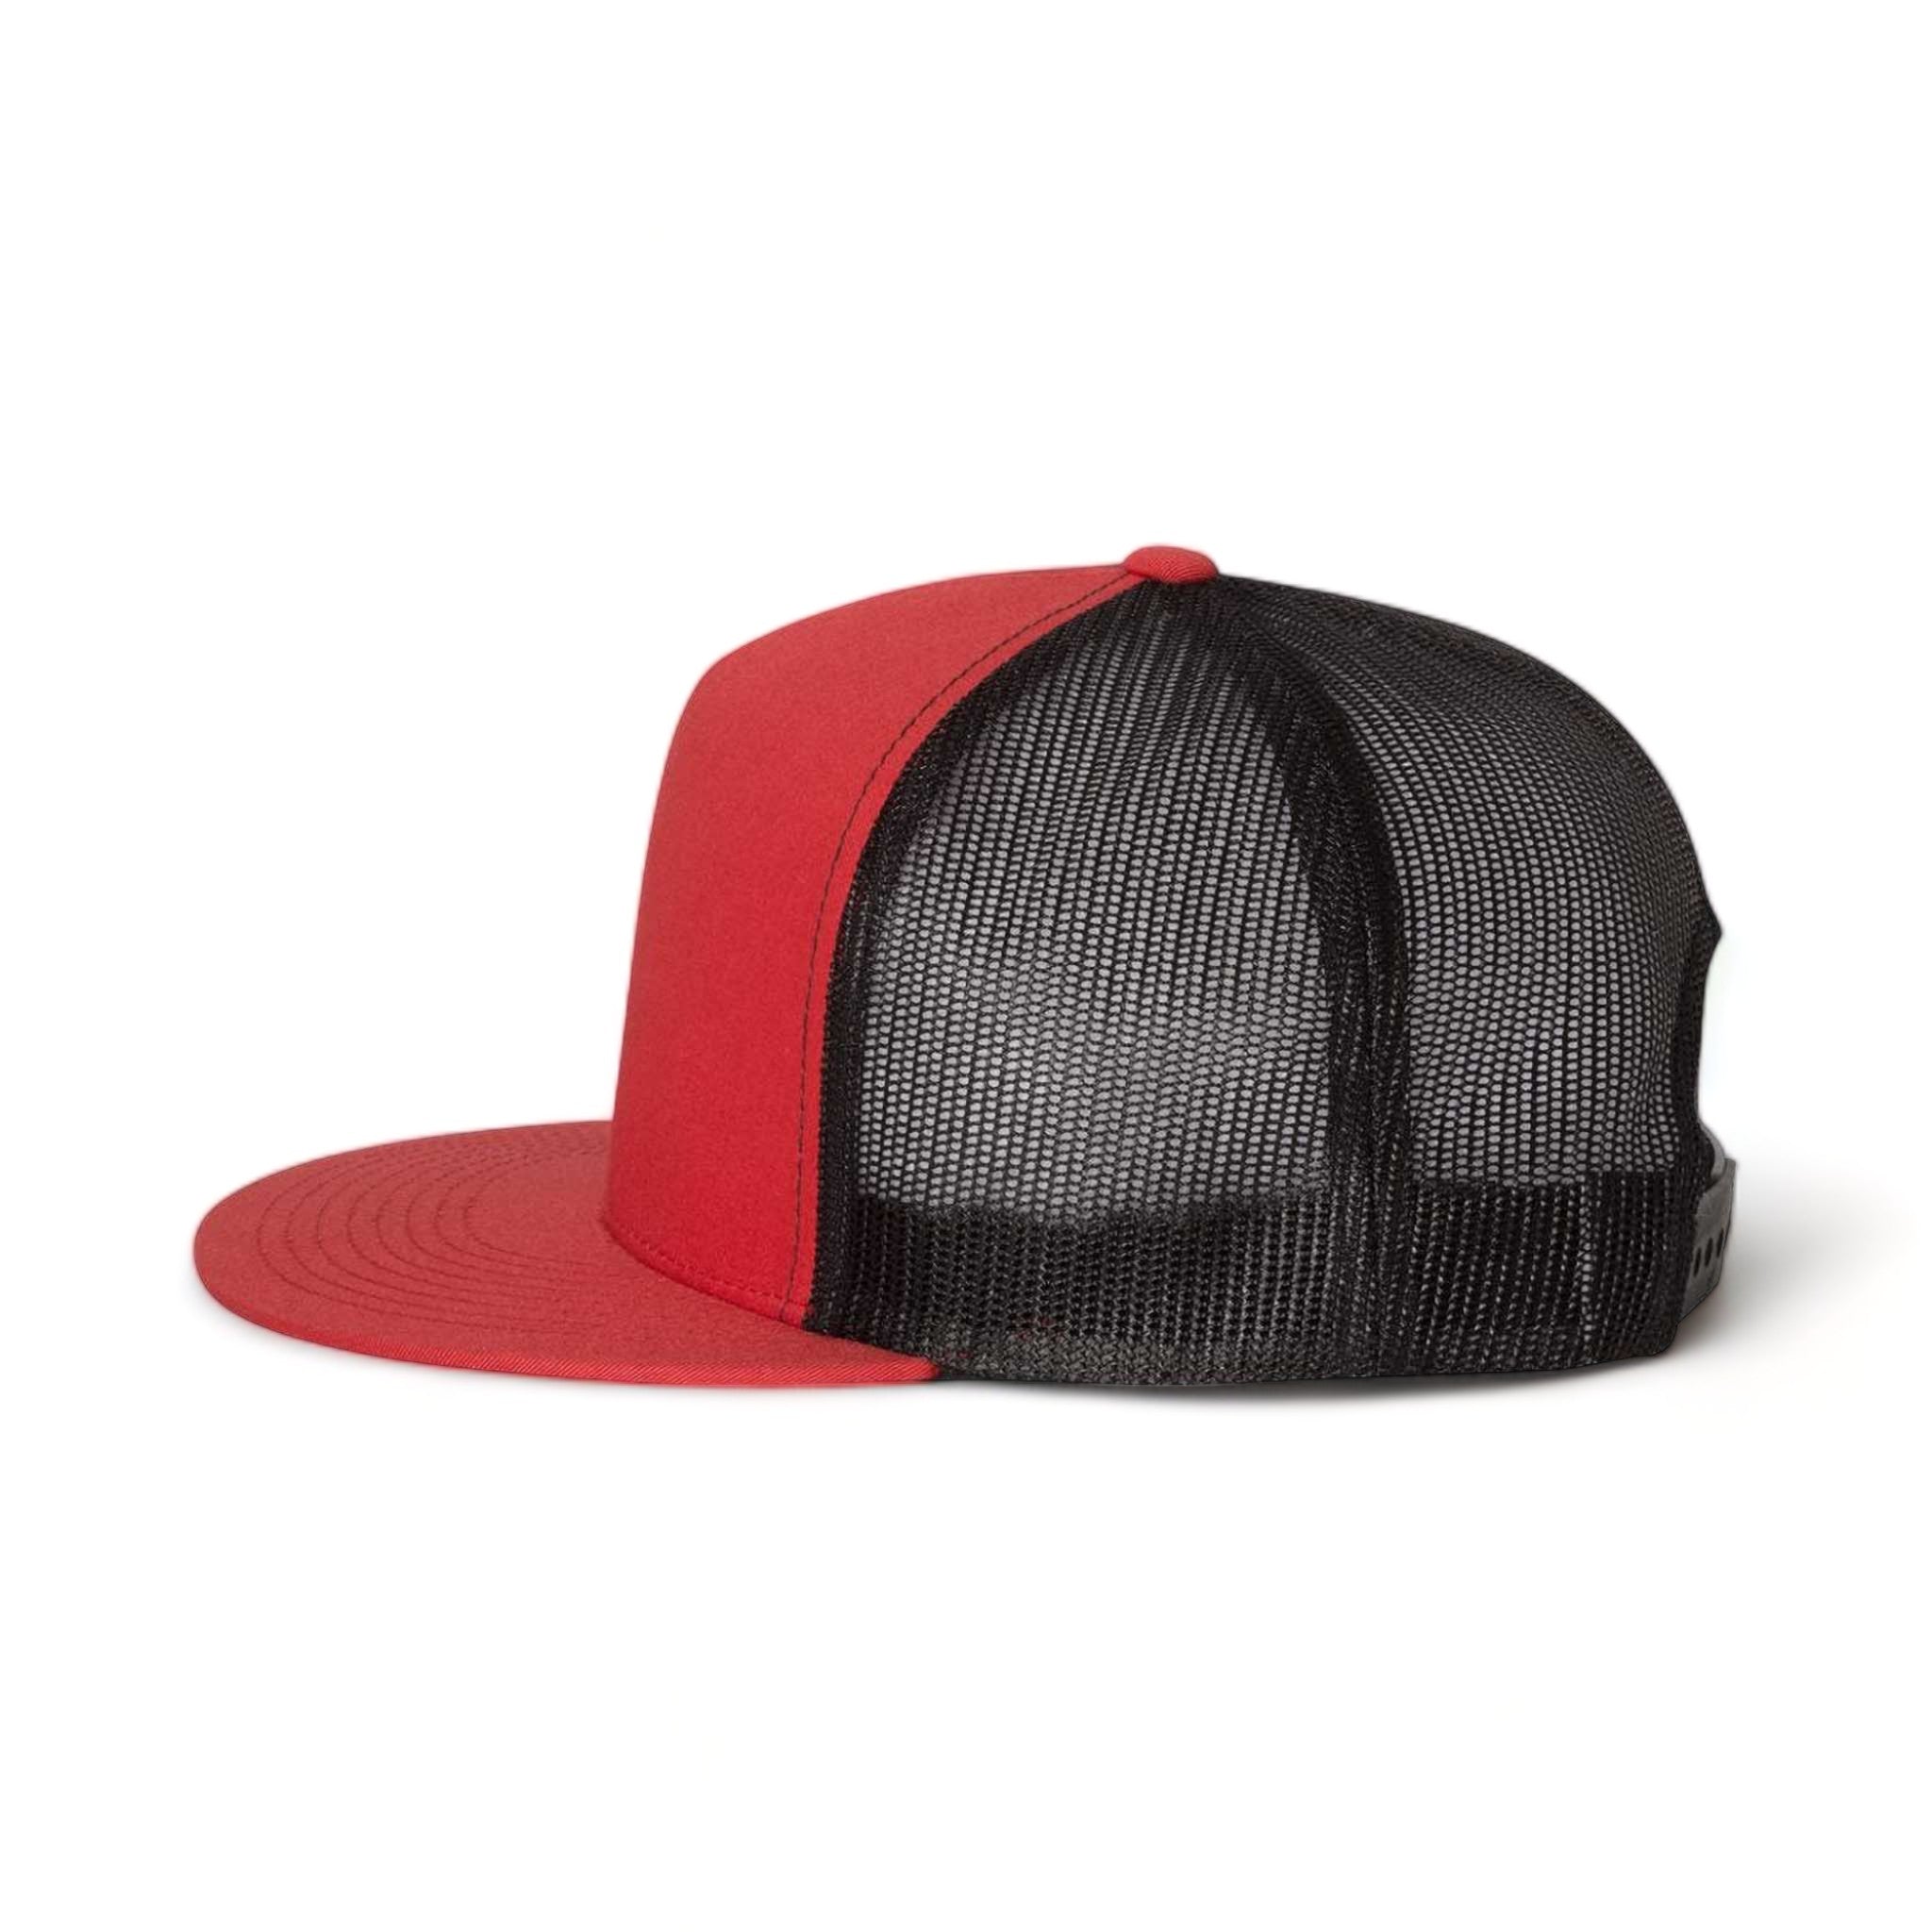 Side view of YP Classics 6006 custom hat in red and black